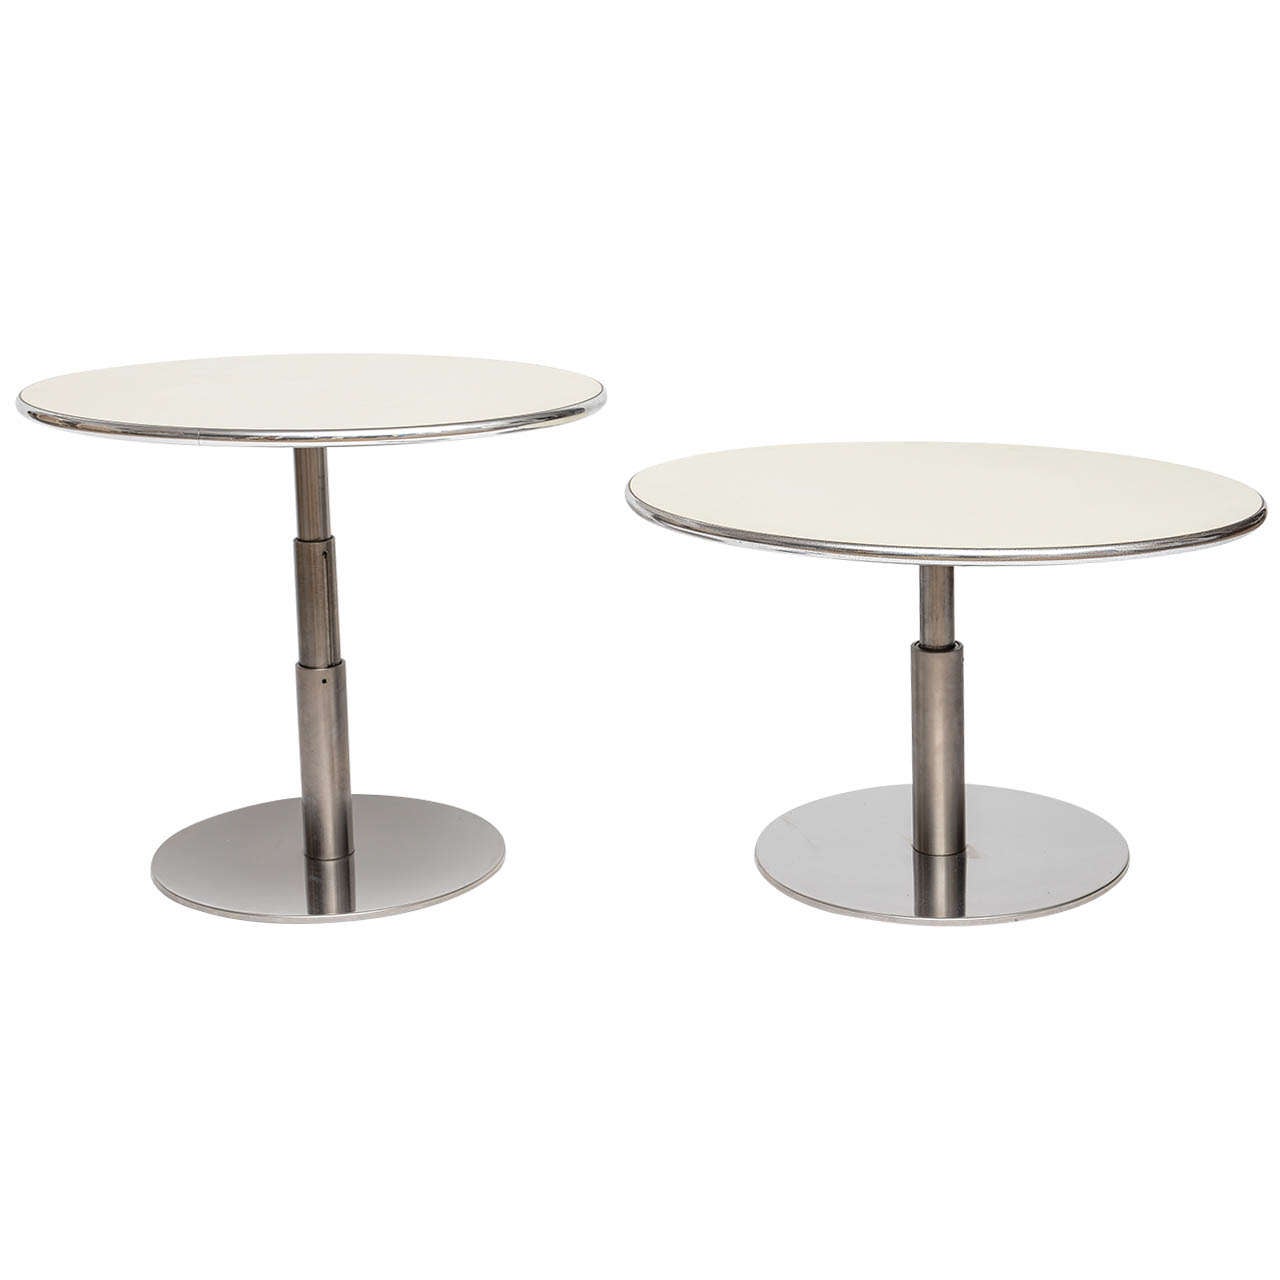 Oval-Top Three-Height-Position Side Tables 